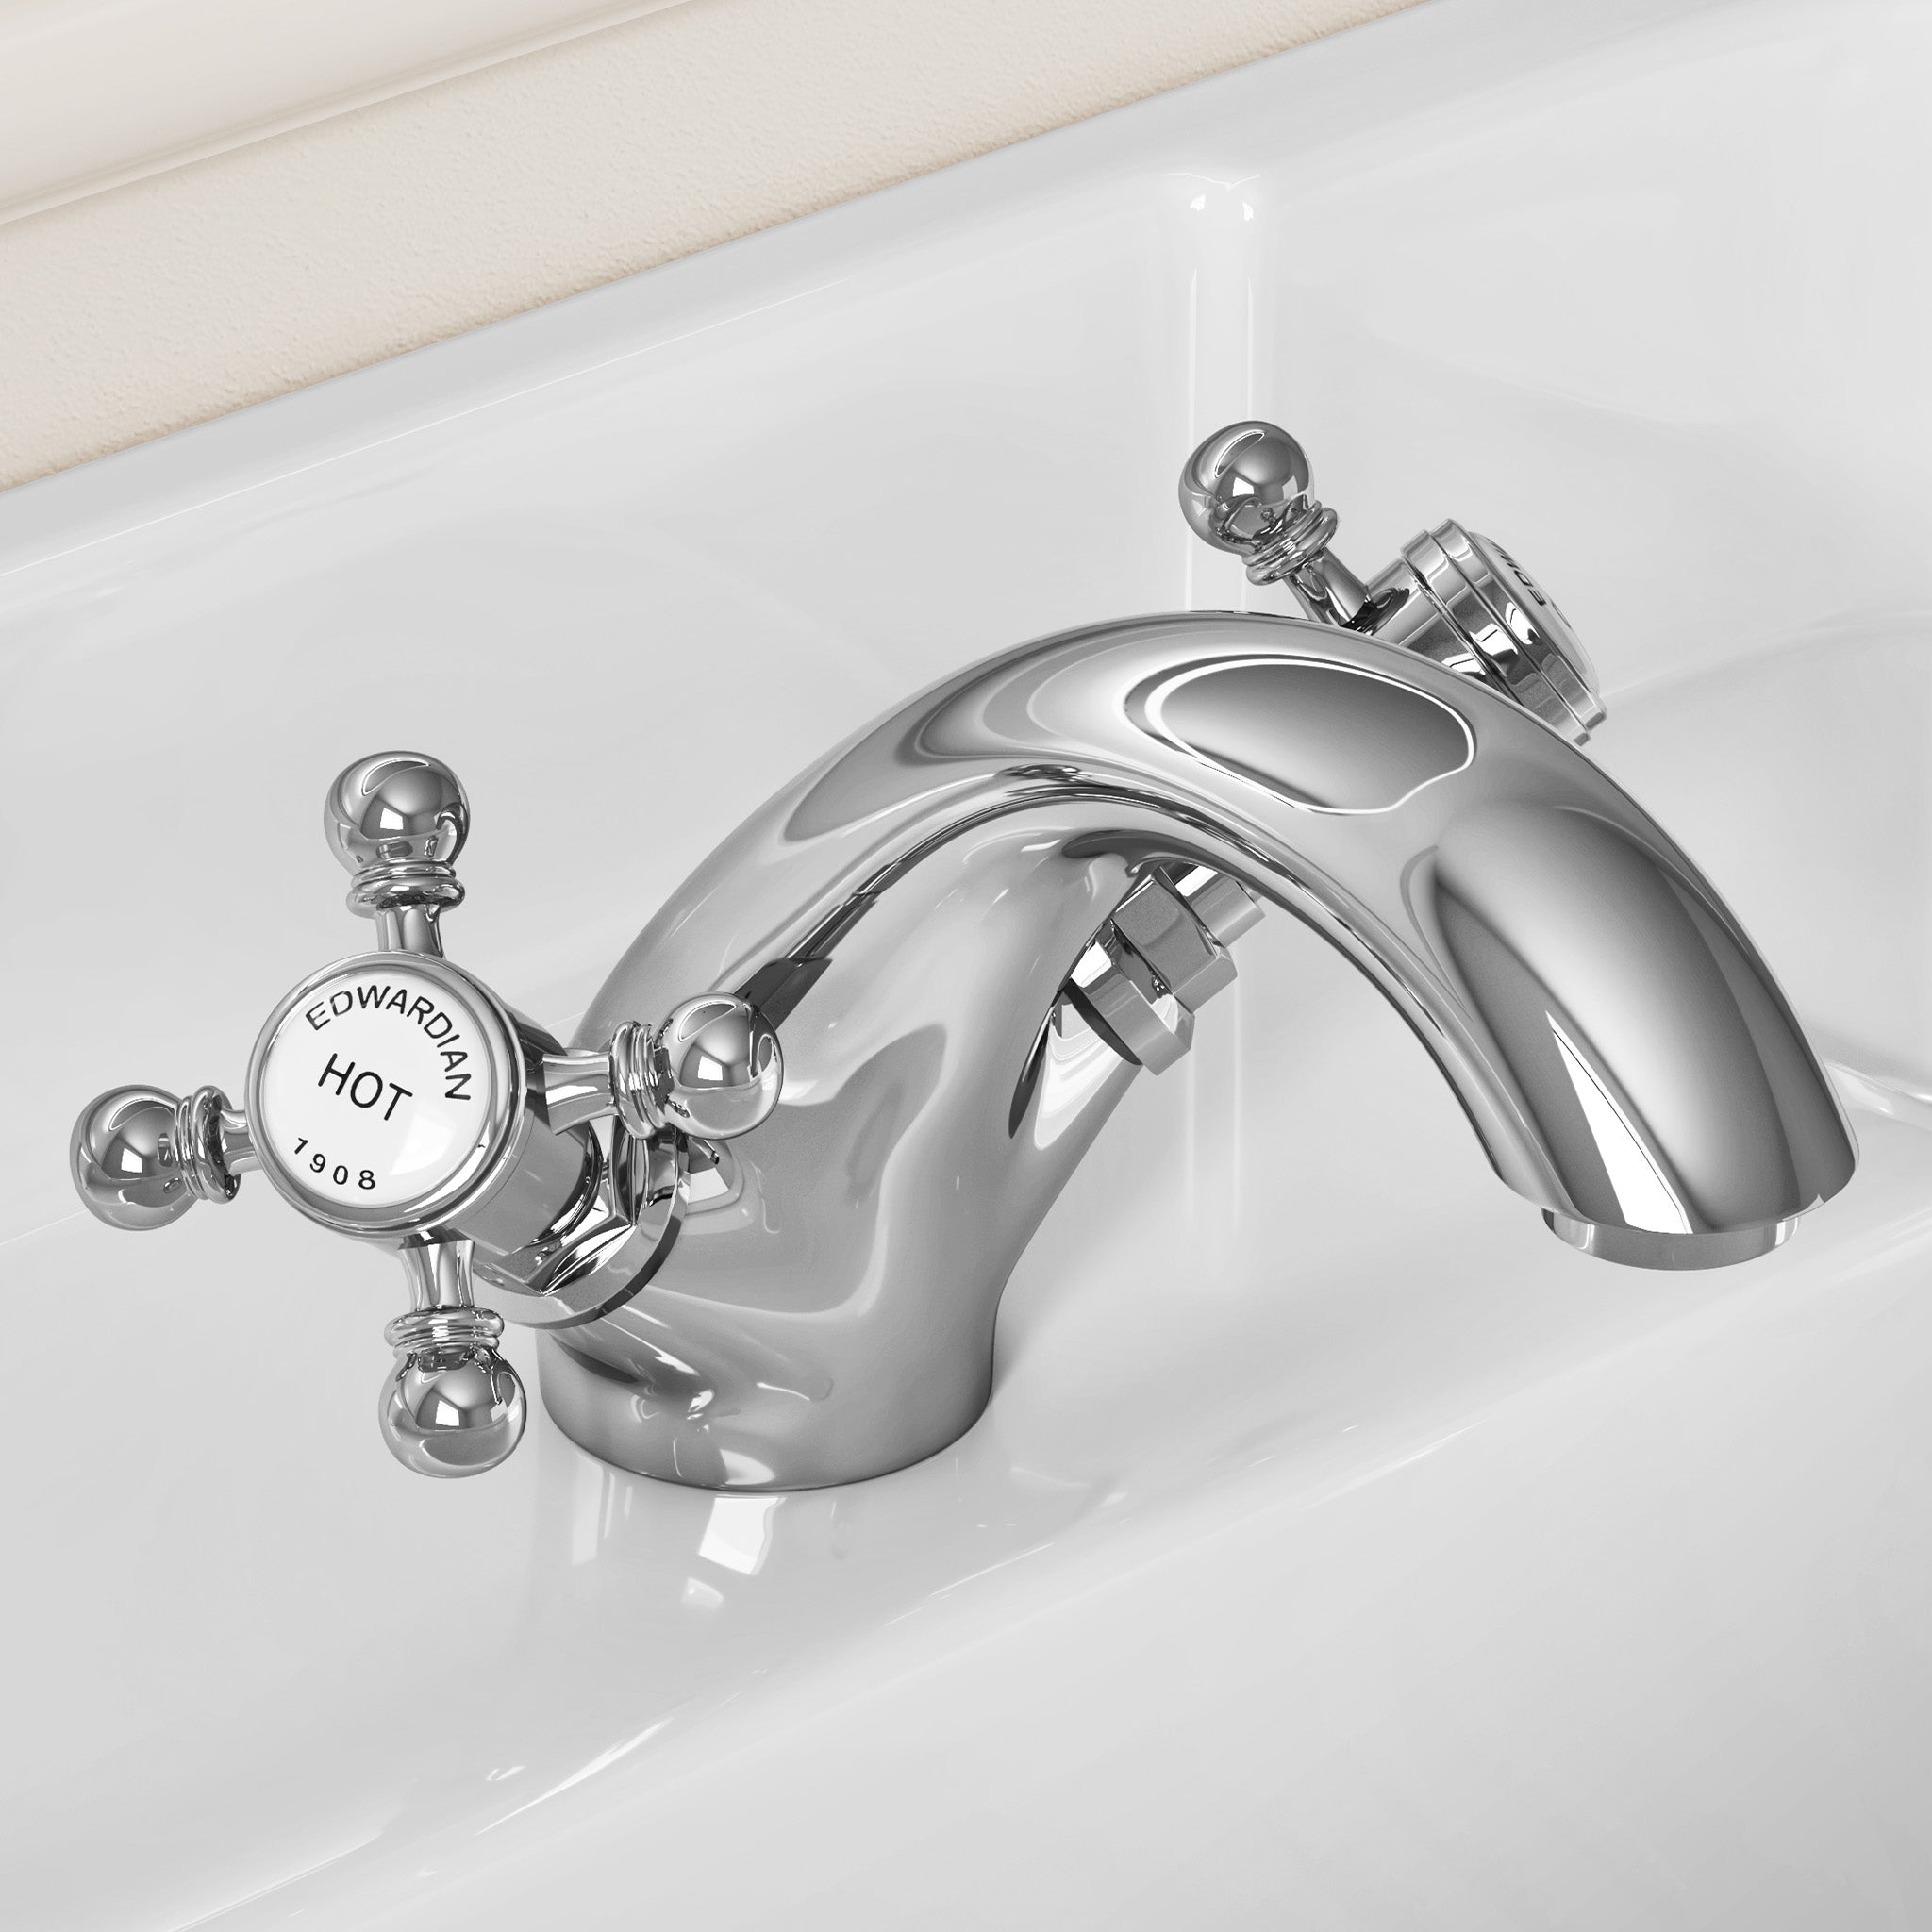 MyStyle Heir Traditional Basin Mono Mixer Tap & Spring Waste